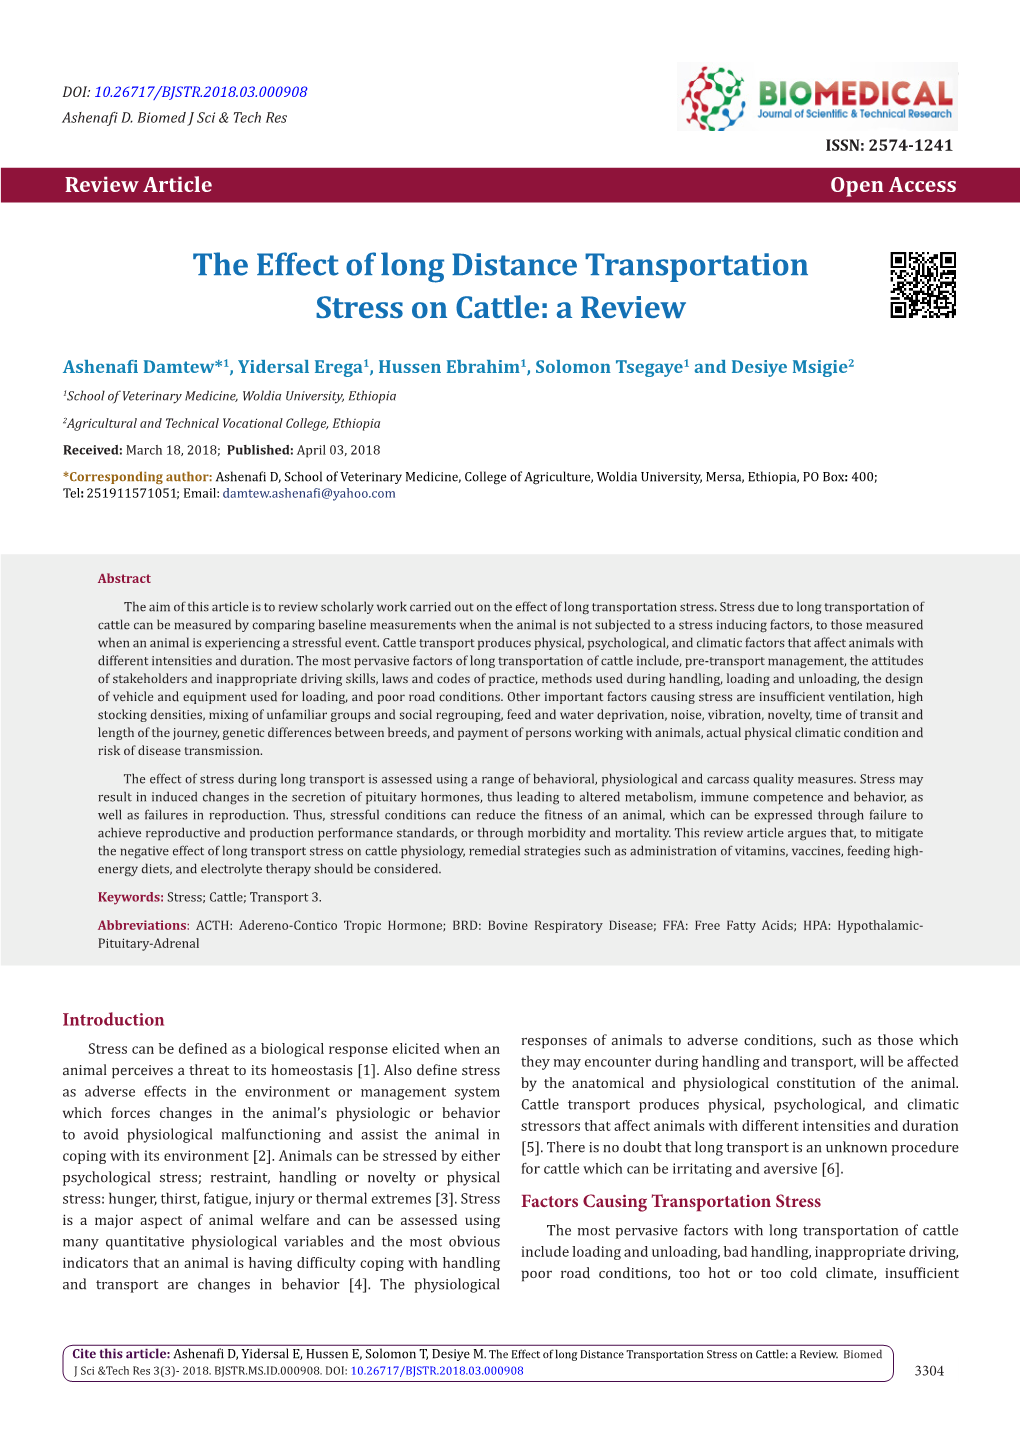 The Effect of Long Distance Transportation Stress on Cattle: a Review